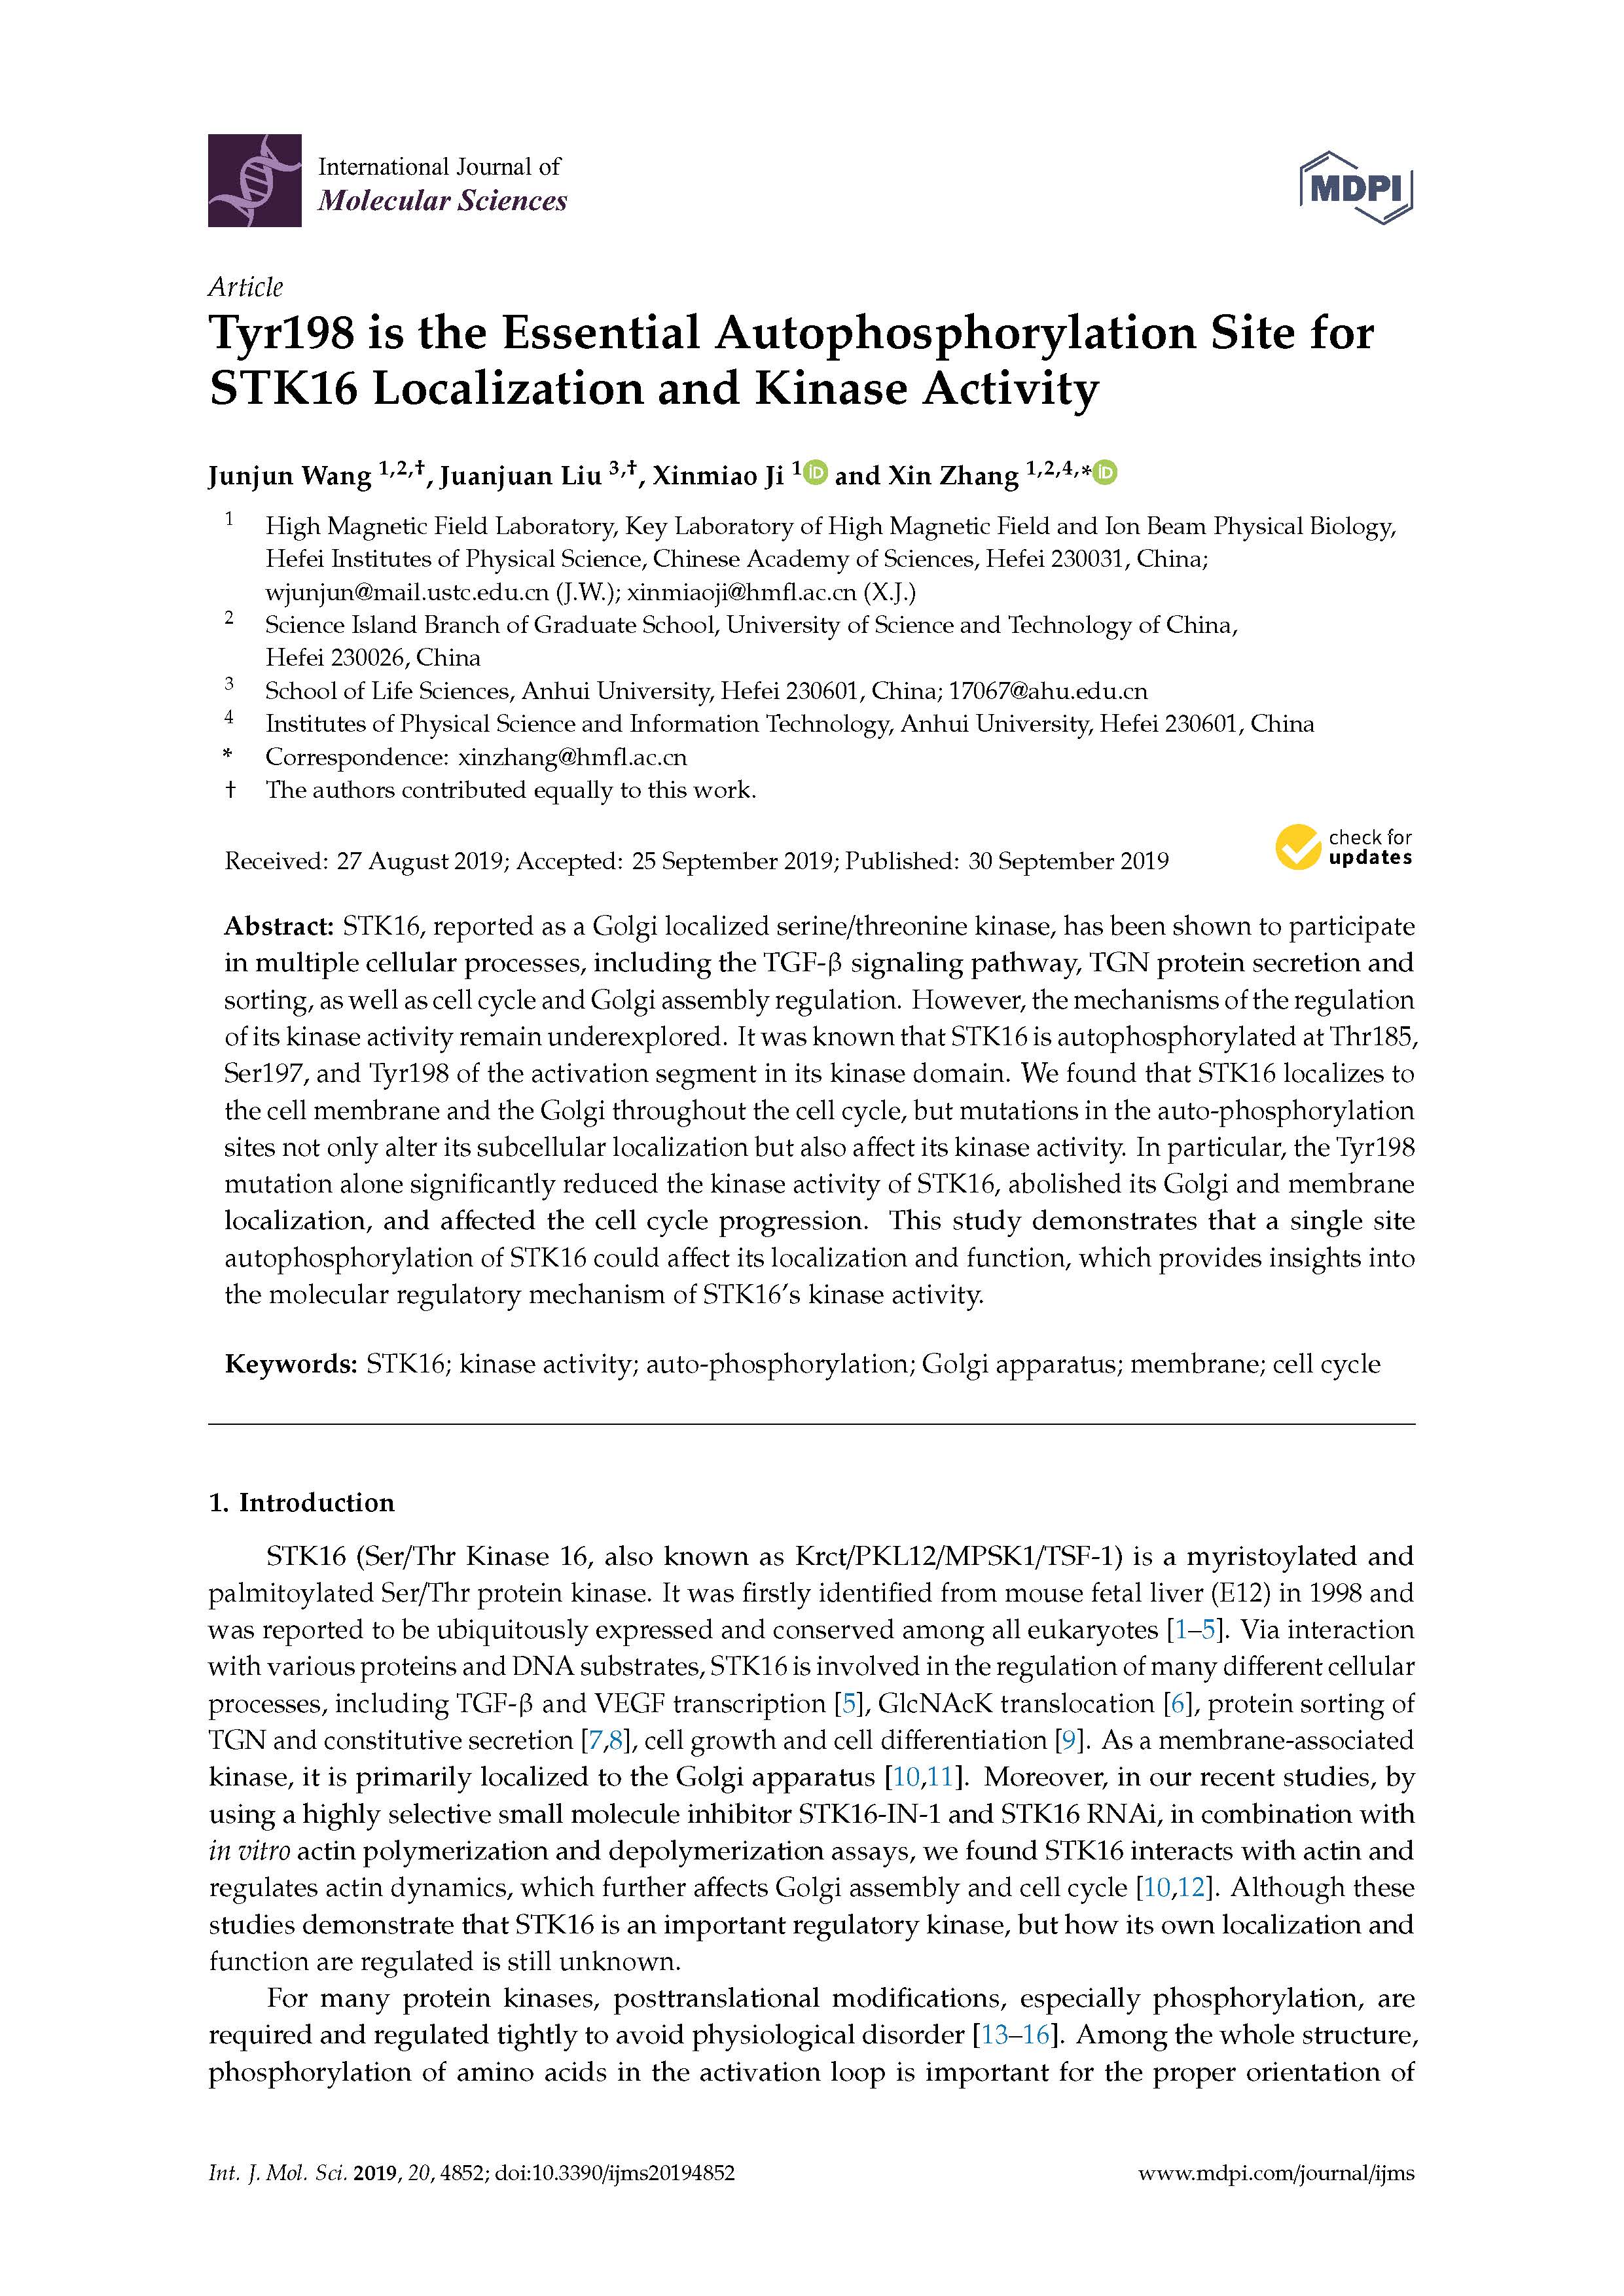 37-2019 Tyr198 is the essential autophosphorylation site for STK16 localization and kinase activity-张欣致谢文章_页面_01